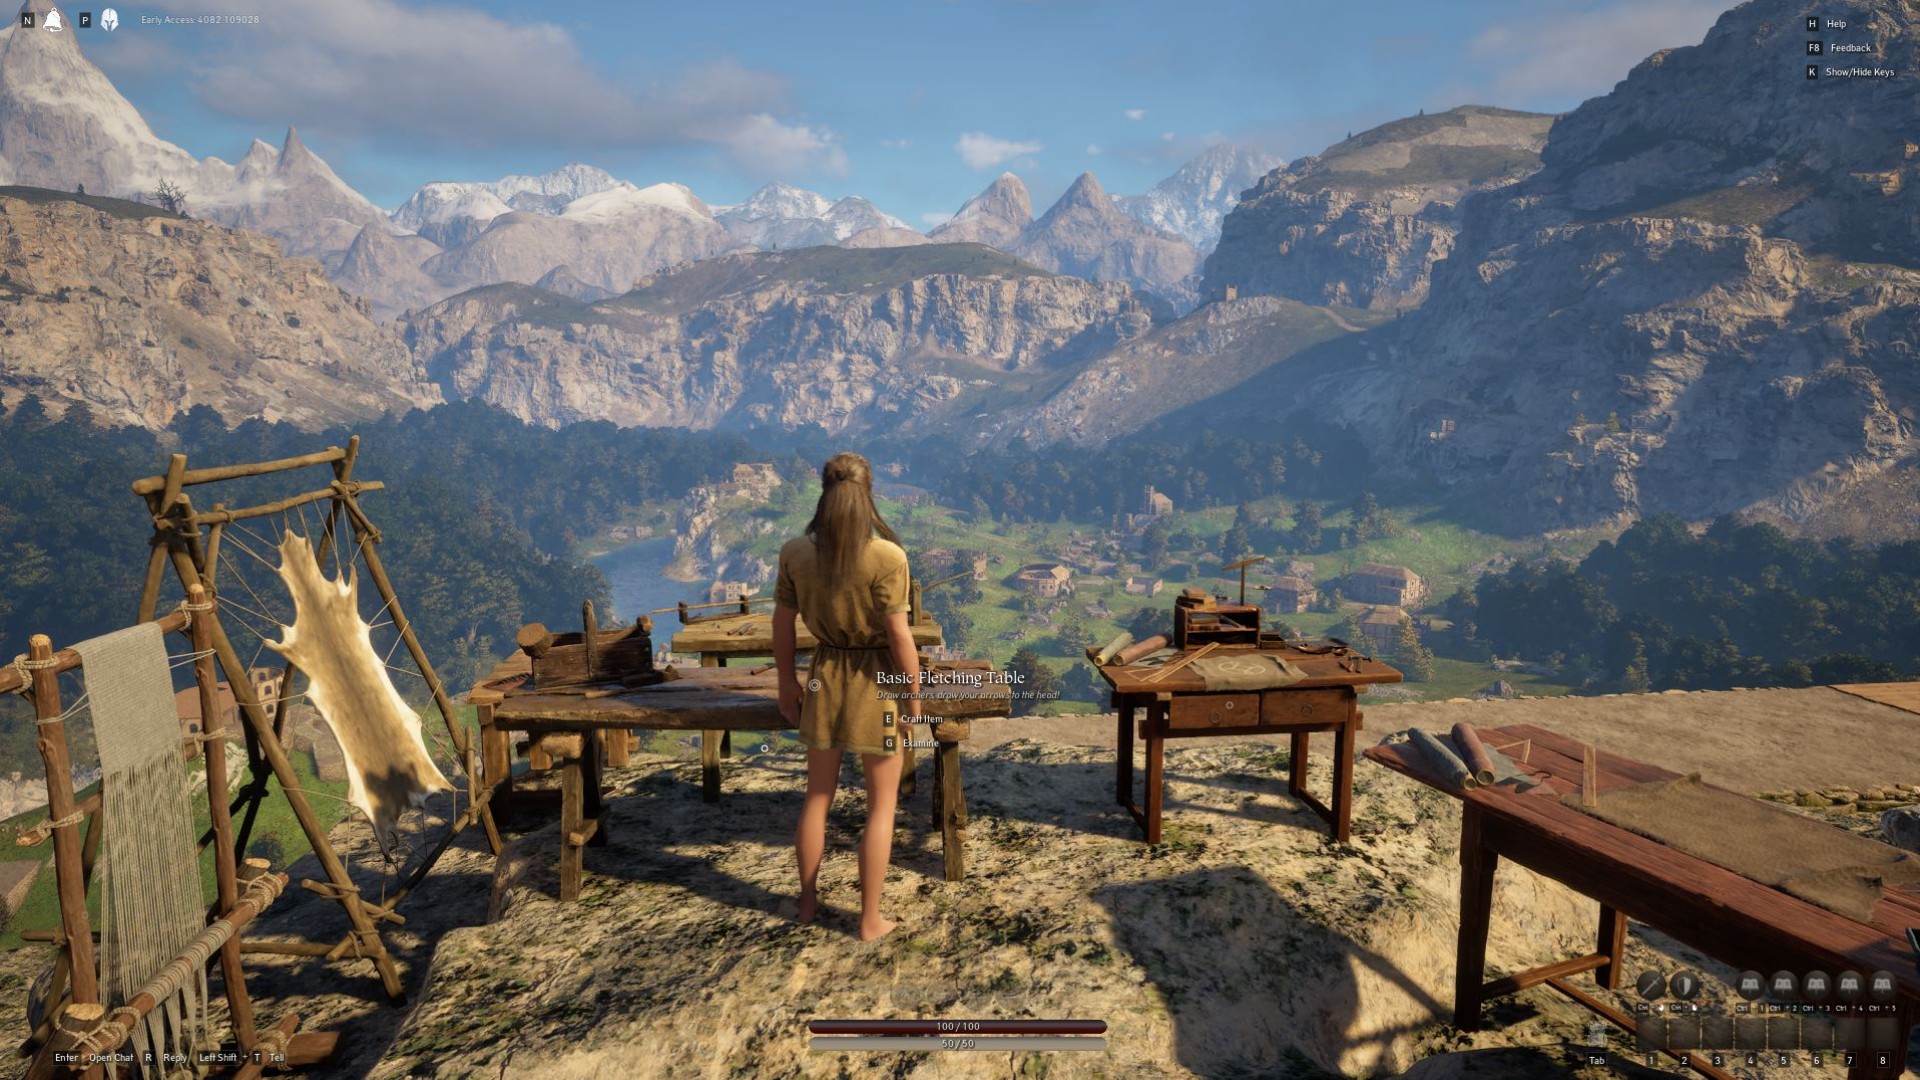 Pax Dei impressions: The player character stands at a crafting bench, looking over a village build in a valley surrounded by mountains.